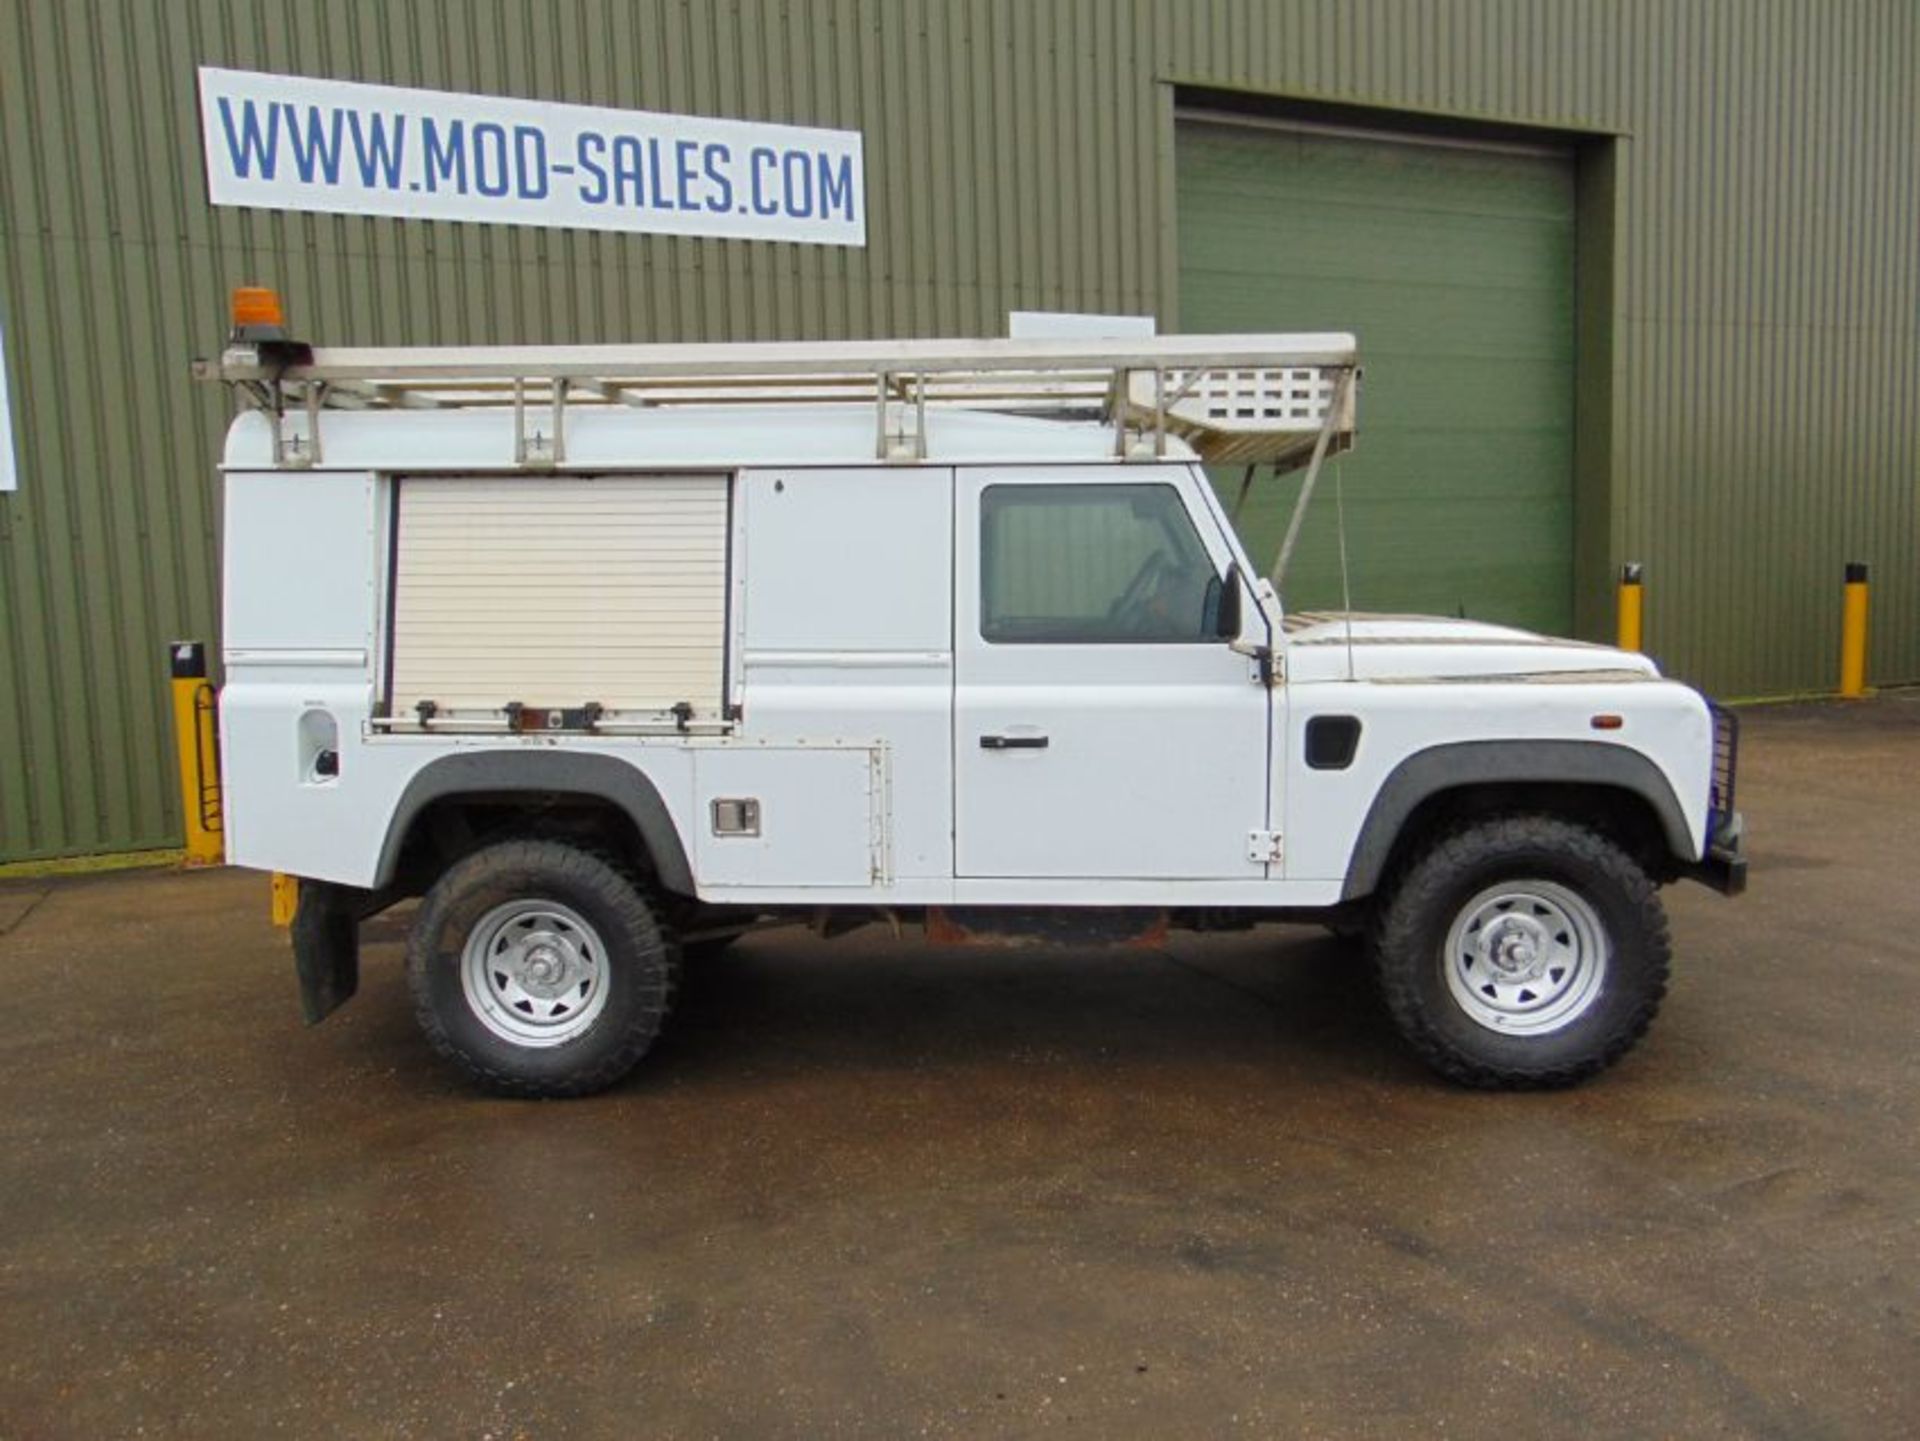 2011 Land Rover Defender 110 Puma hardtop 4x4 mobile workshop with Winch Etc. From UK Utility Co. - Image 5 of 31